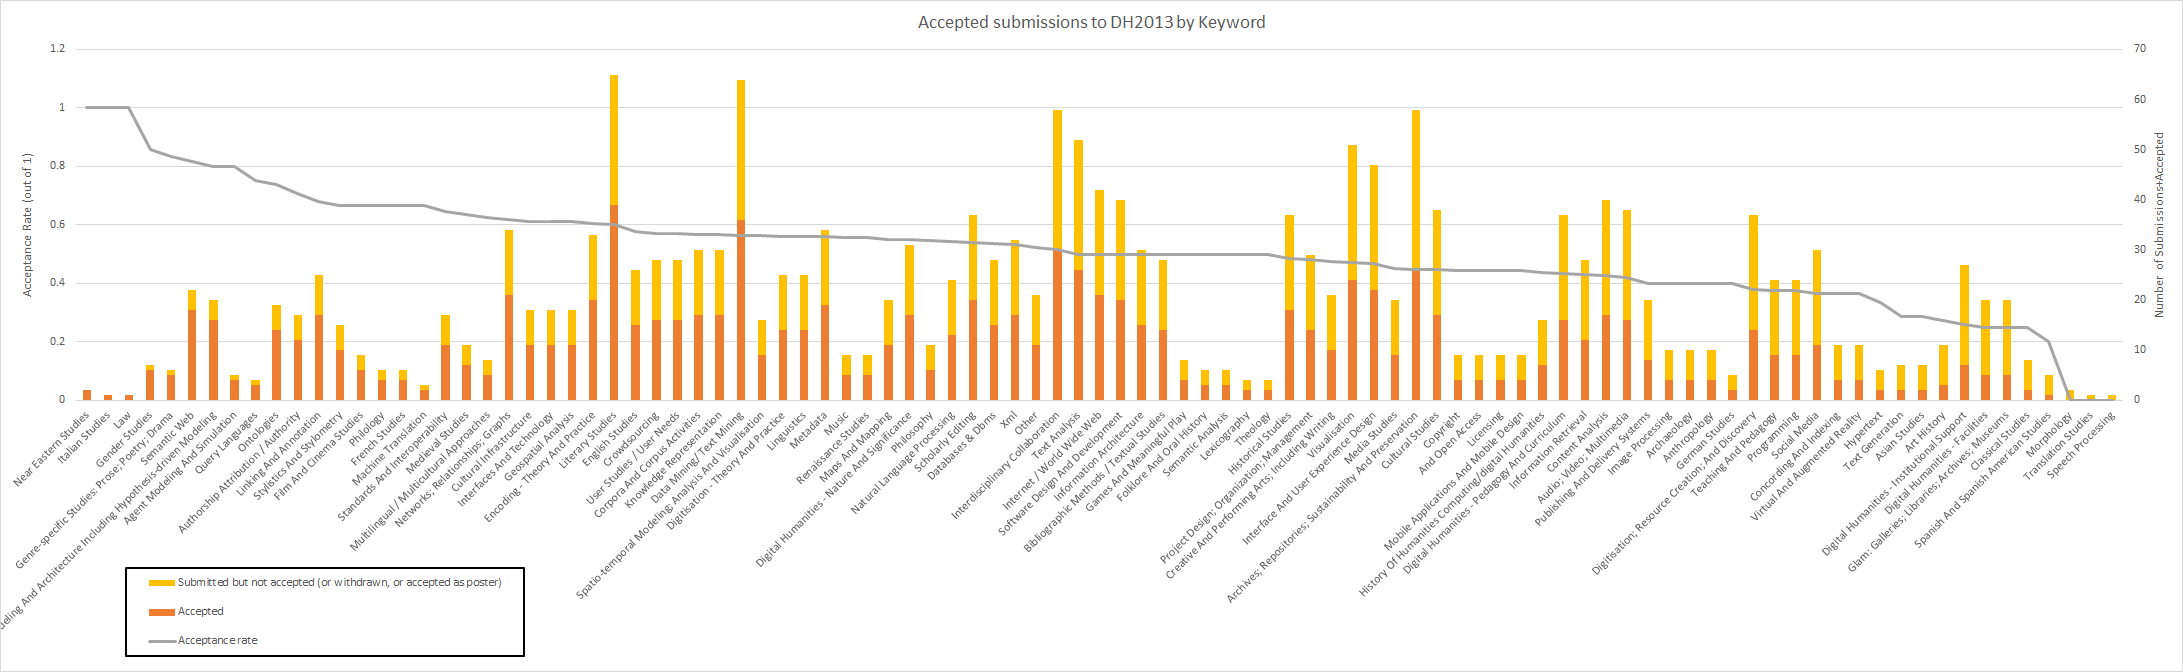 Figure 2. Acceptance rates of DH2013 by Keywords attached to submissions, sorted by number of accepted papers.